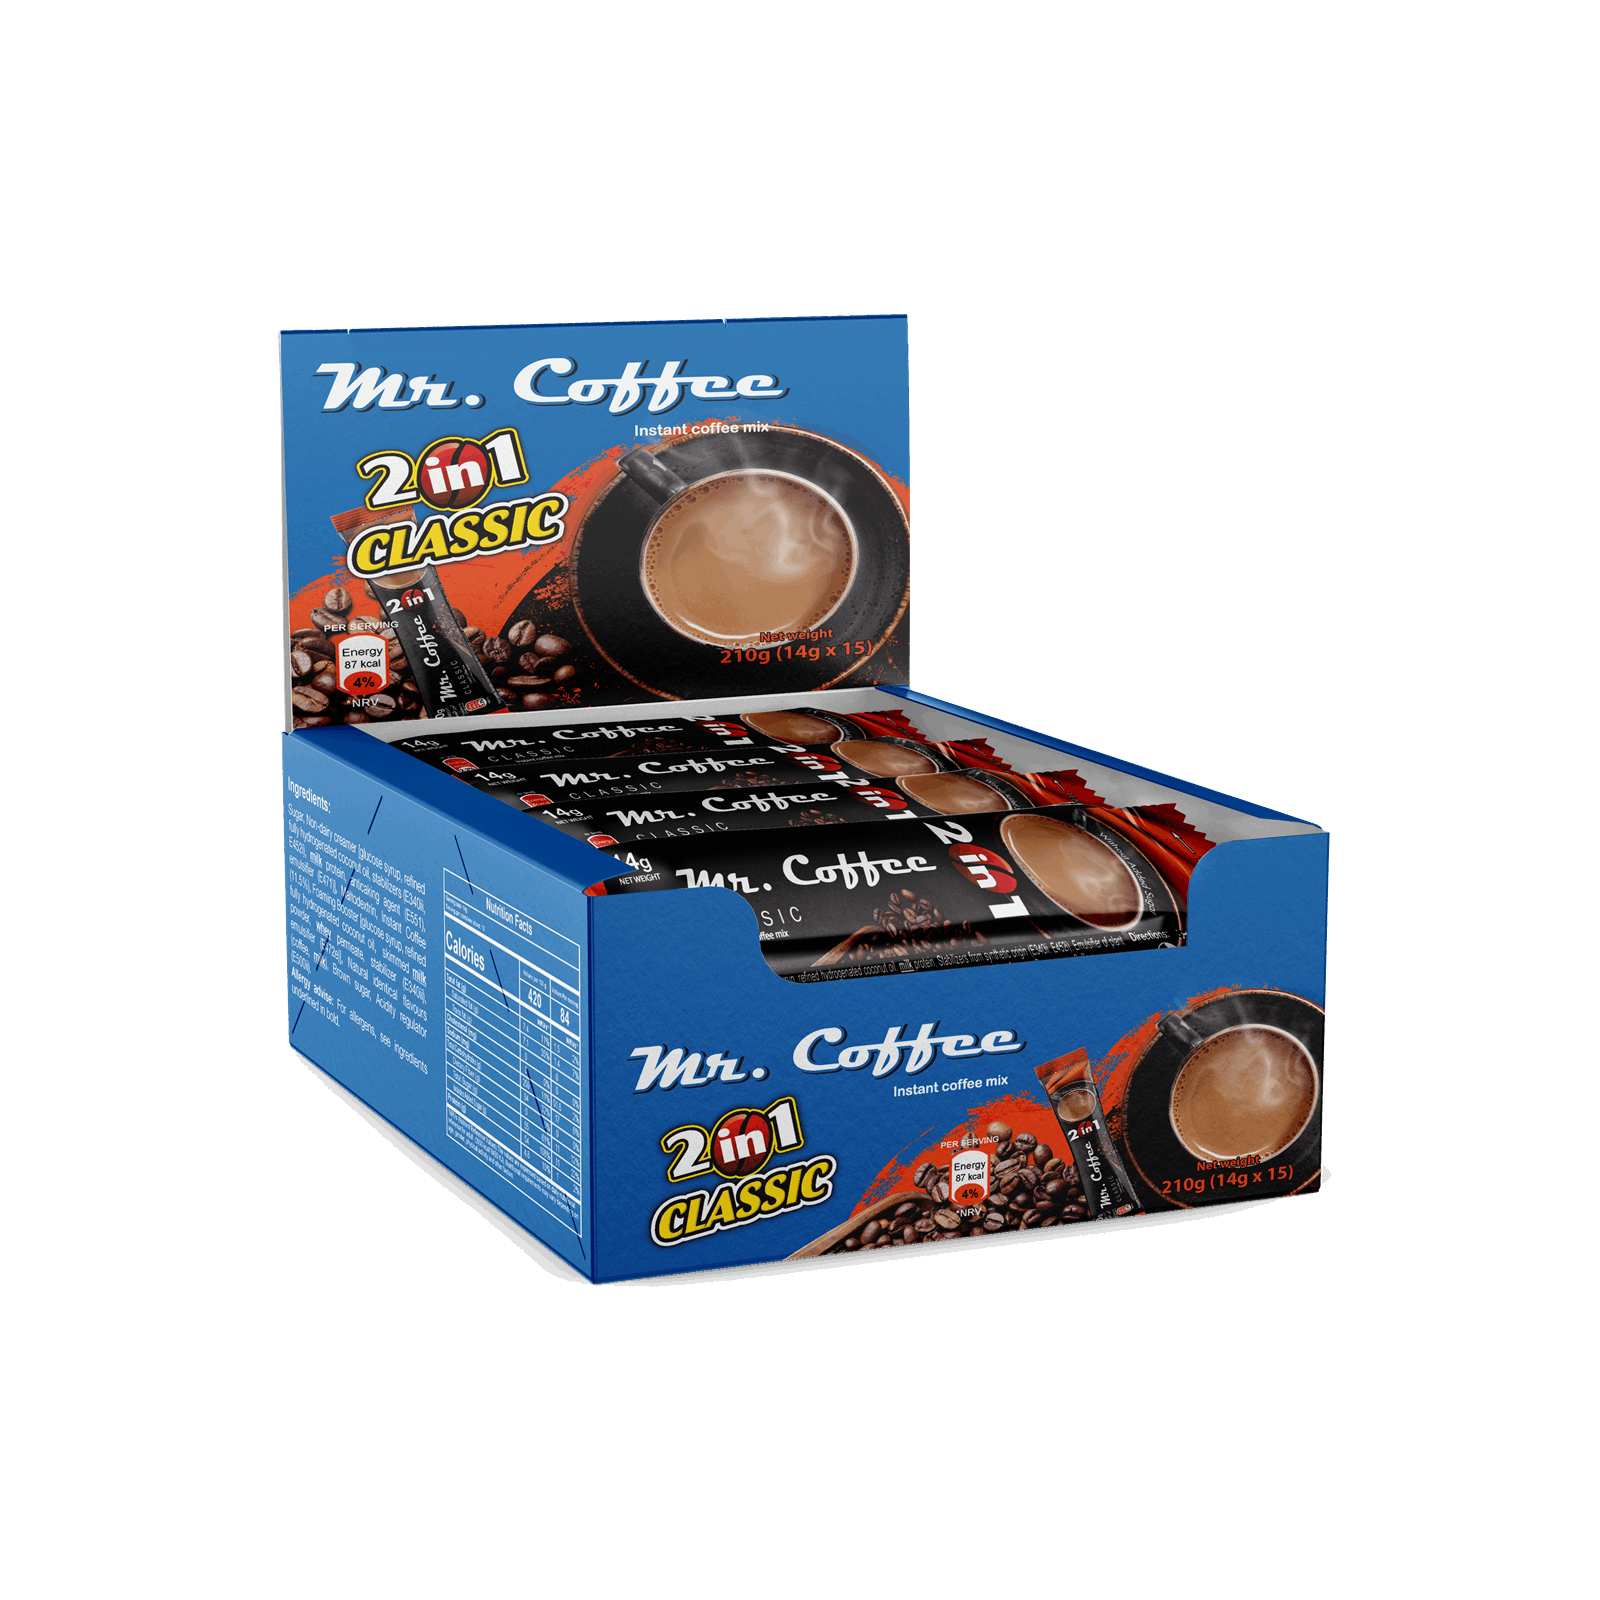 Mr. Coffee Instant Coffee Mixes